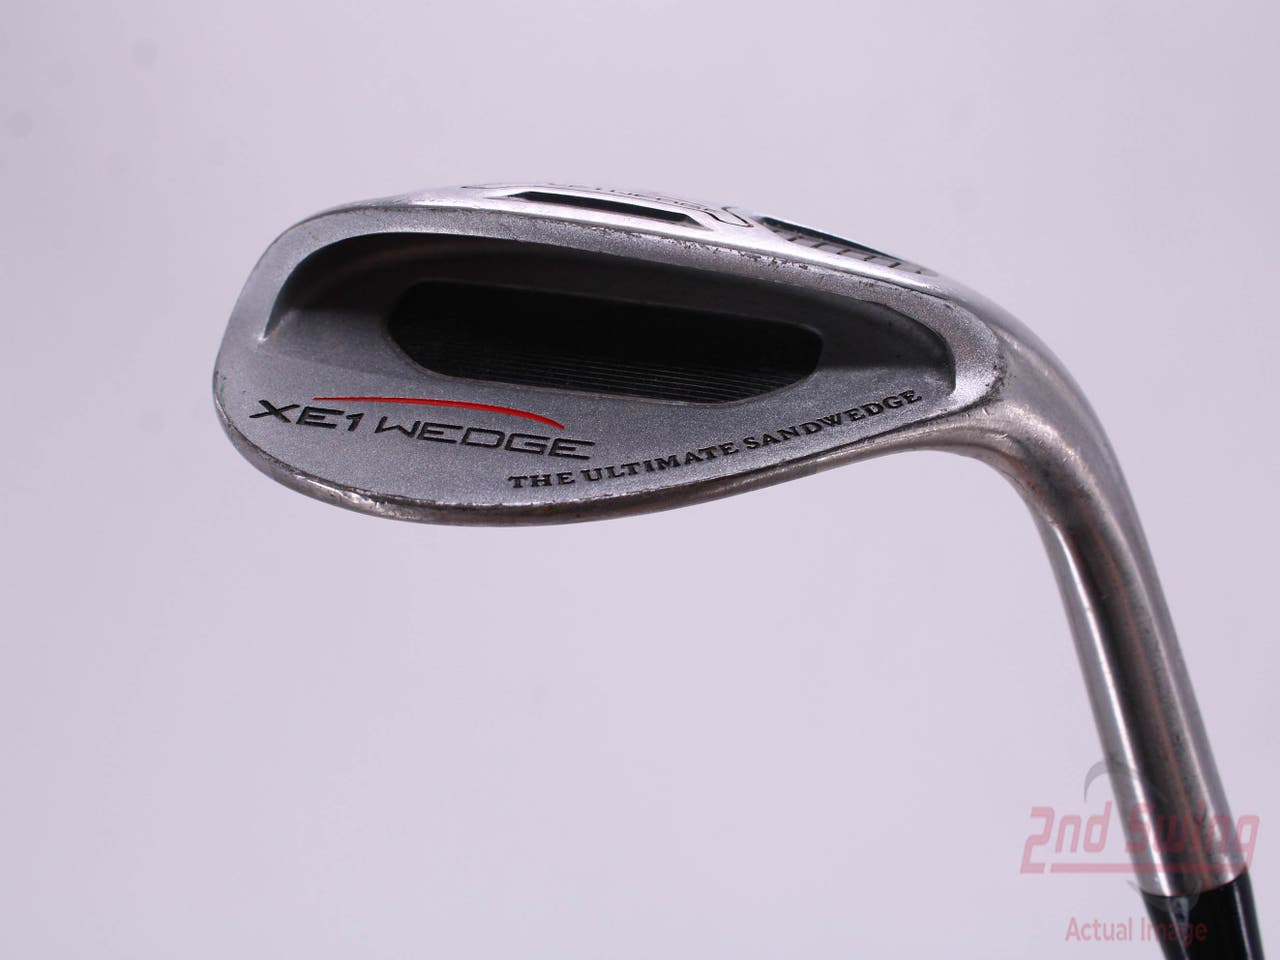 XE1 The Ultimate Wedge Lob LW 65° Steel Right Handed